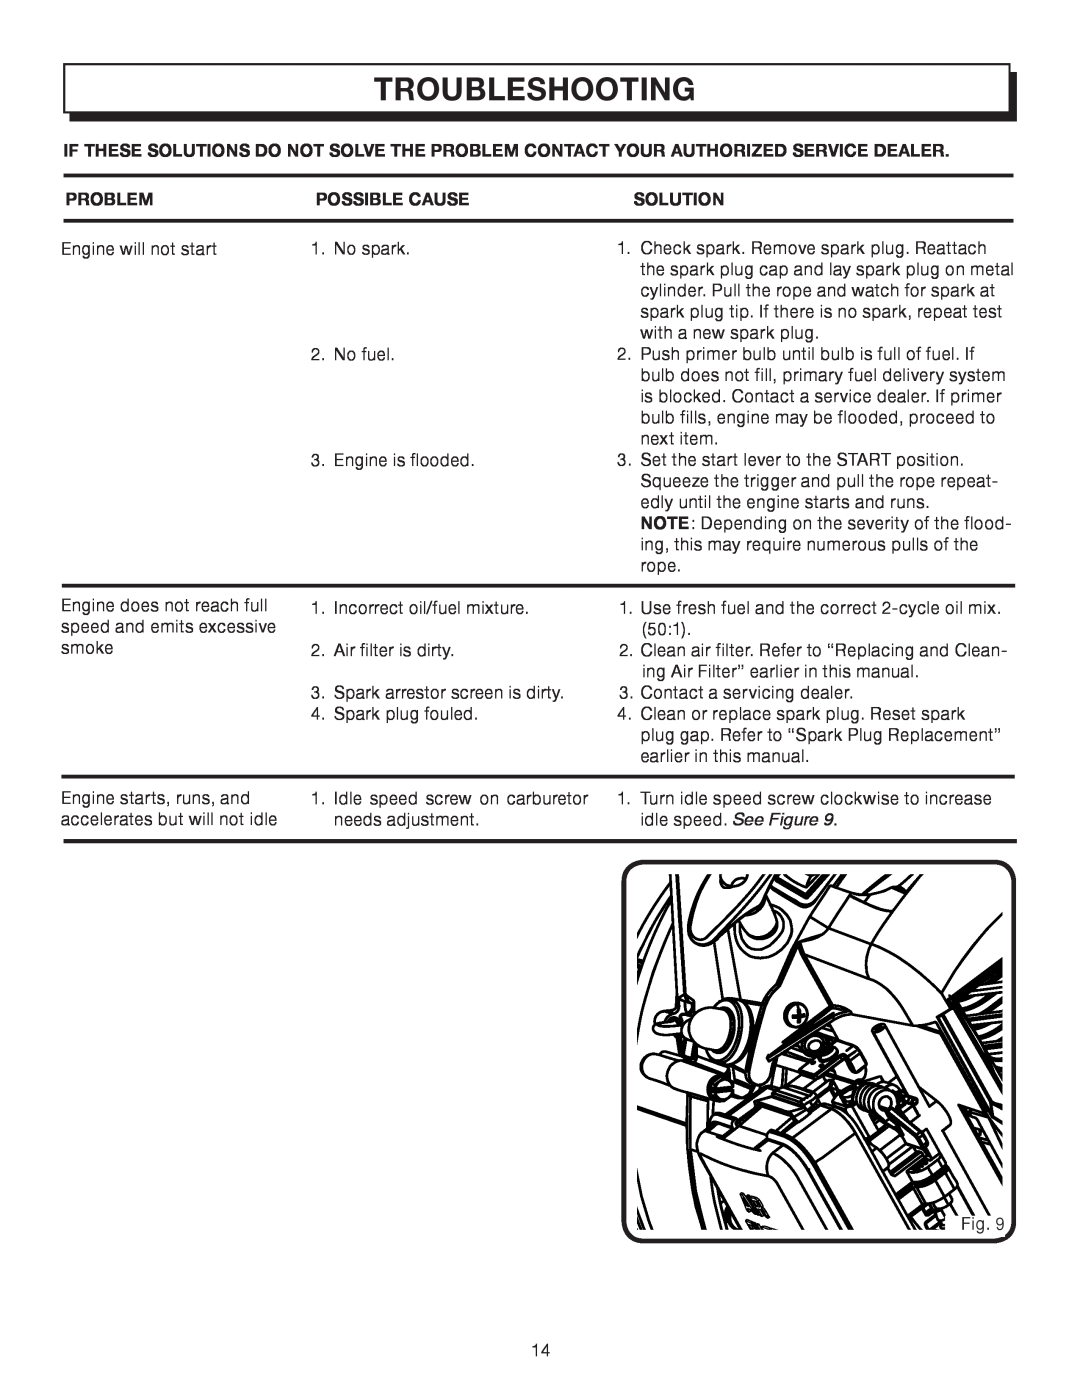 Homelite UT08512A manual Troubleshooting, Problem, Possible Cause, Solution 